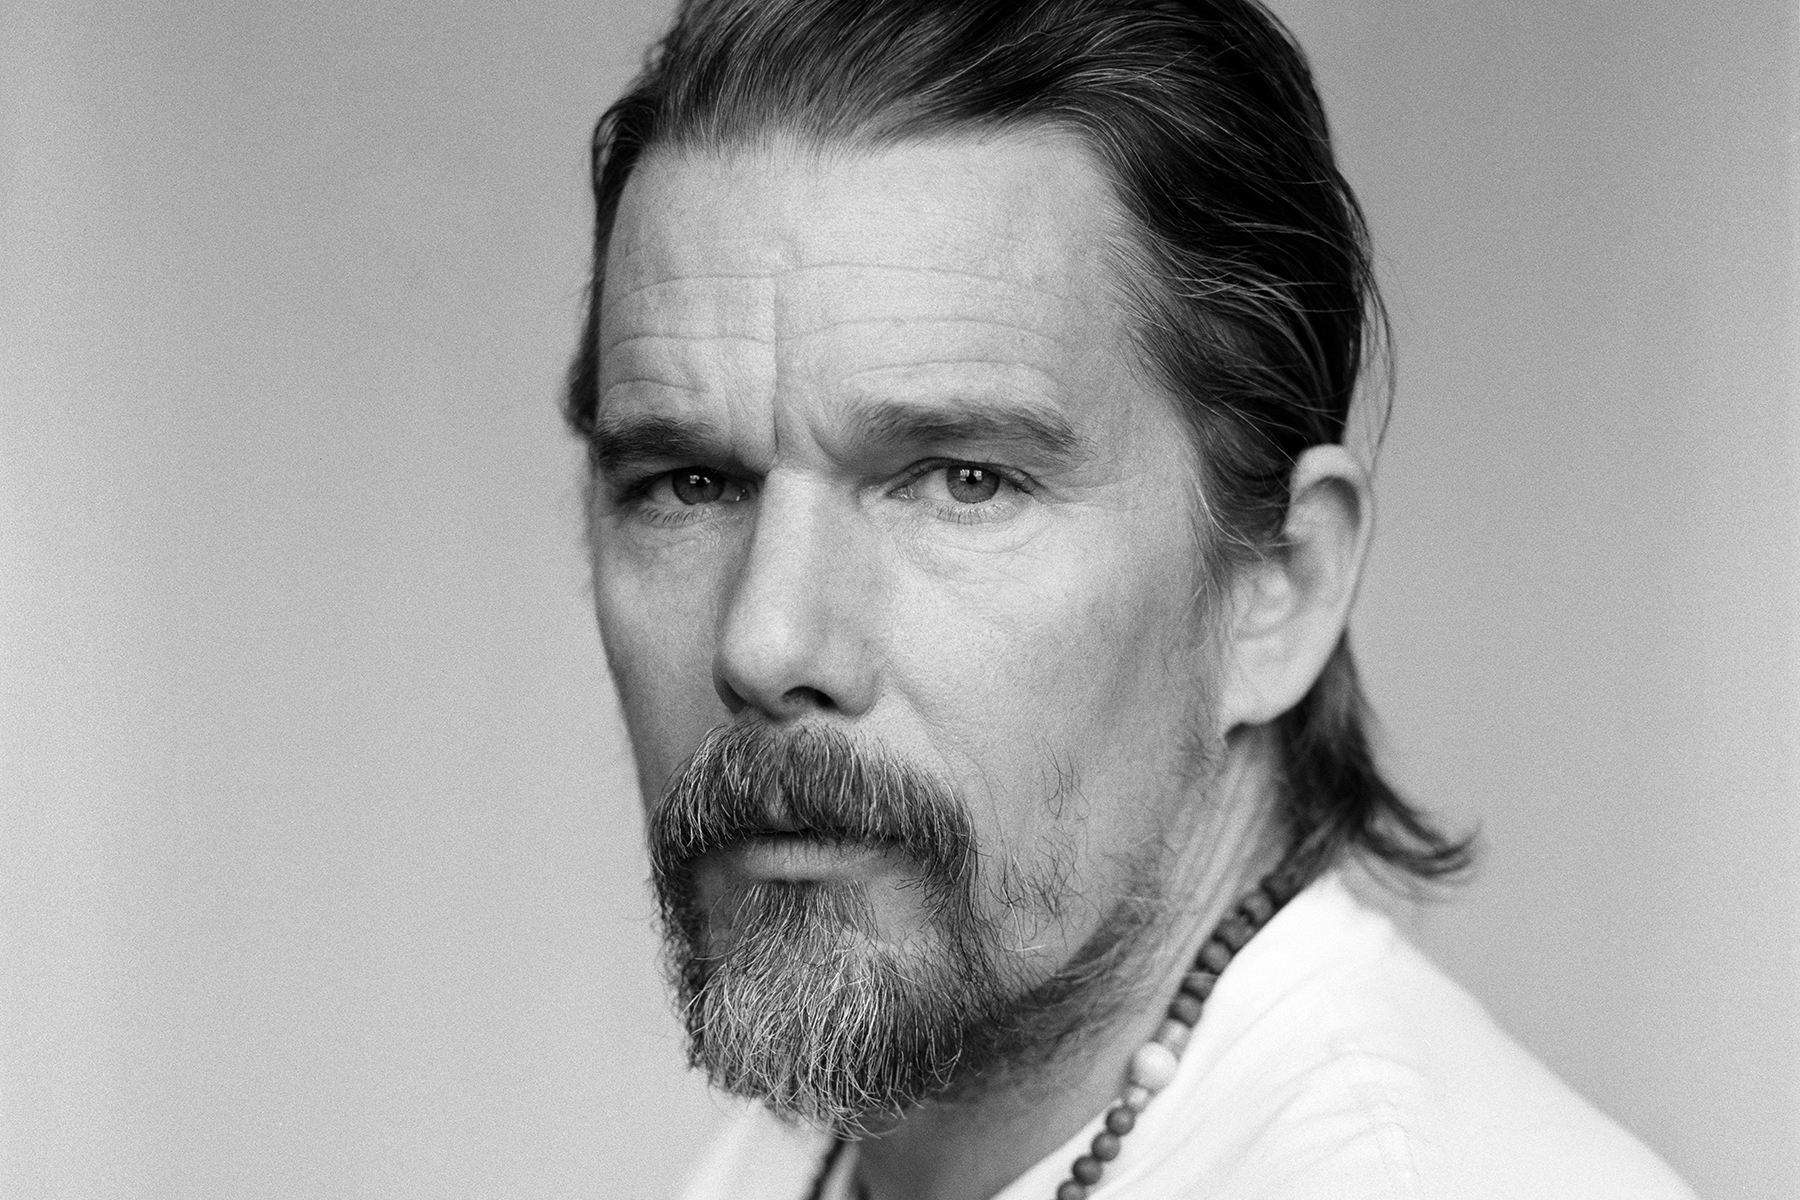 /content/dam/prh/articles/adults/2021/january/EthanHawke_1800x1200.jpg